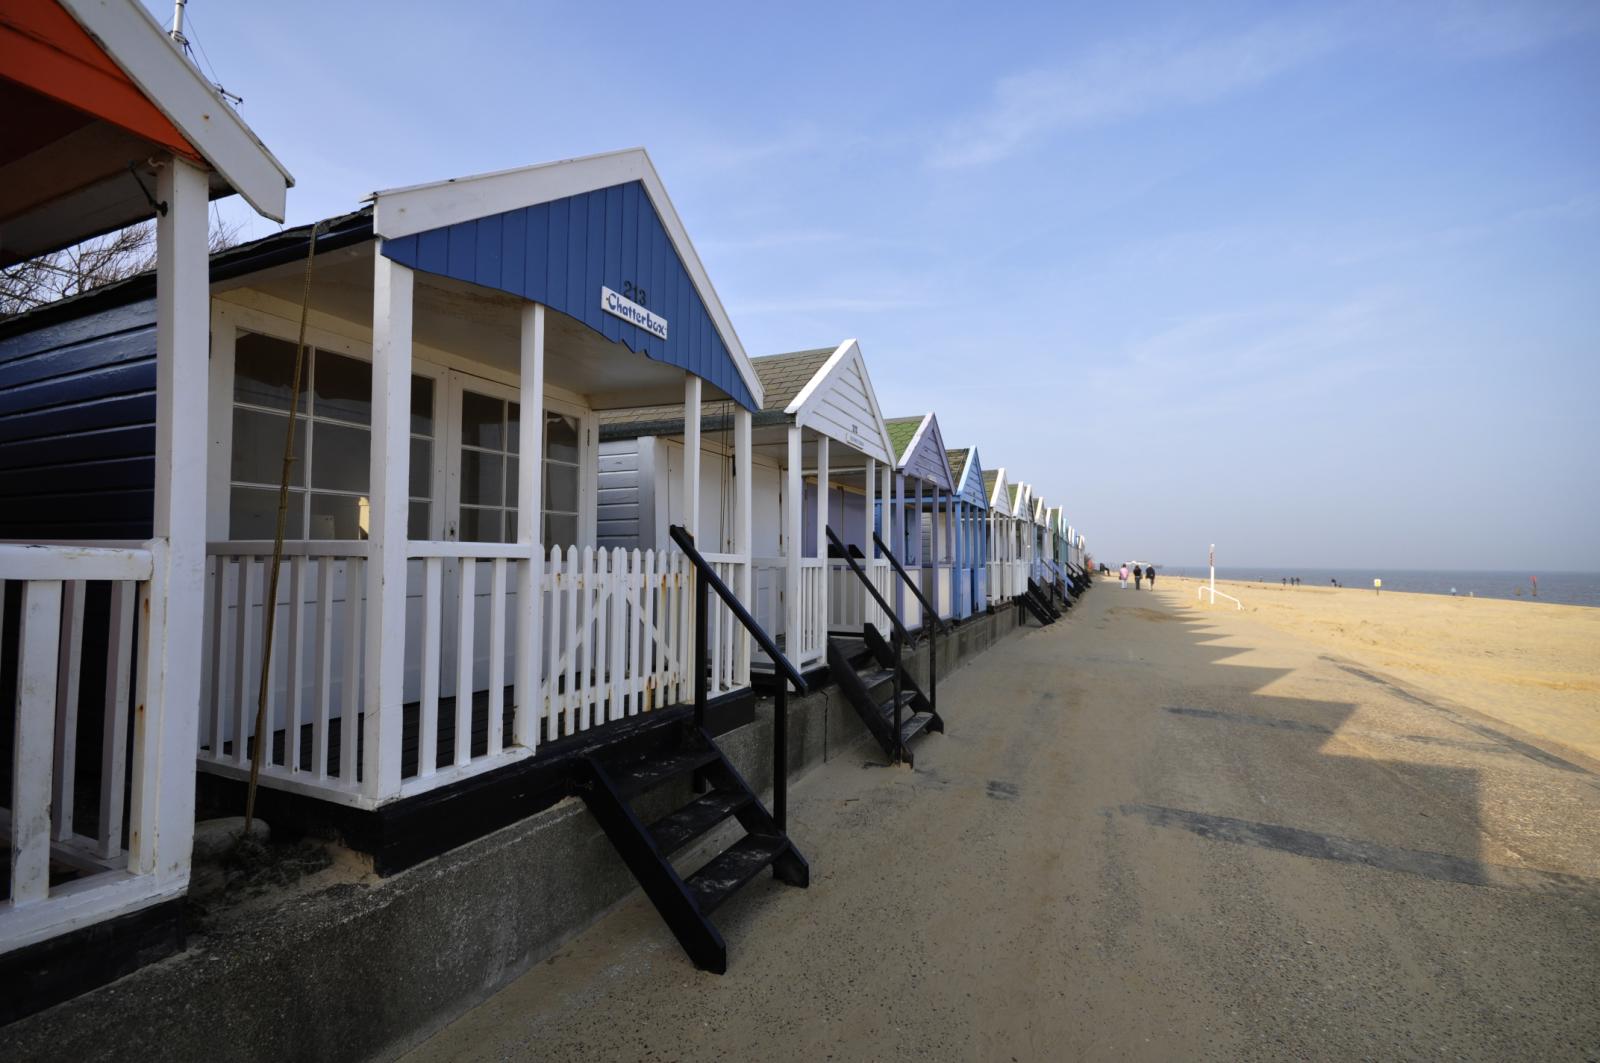 row of beach huts on a beach lined with stairs